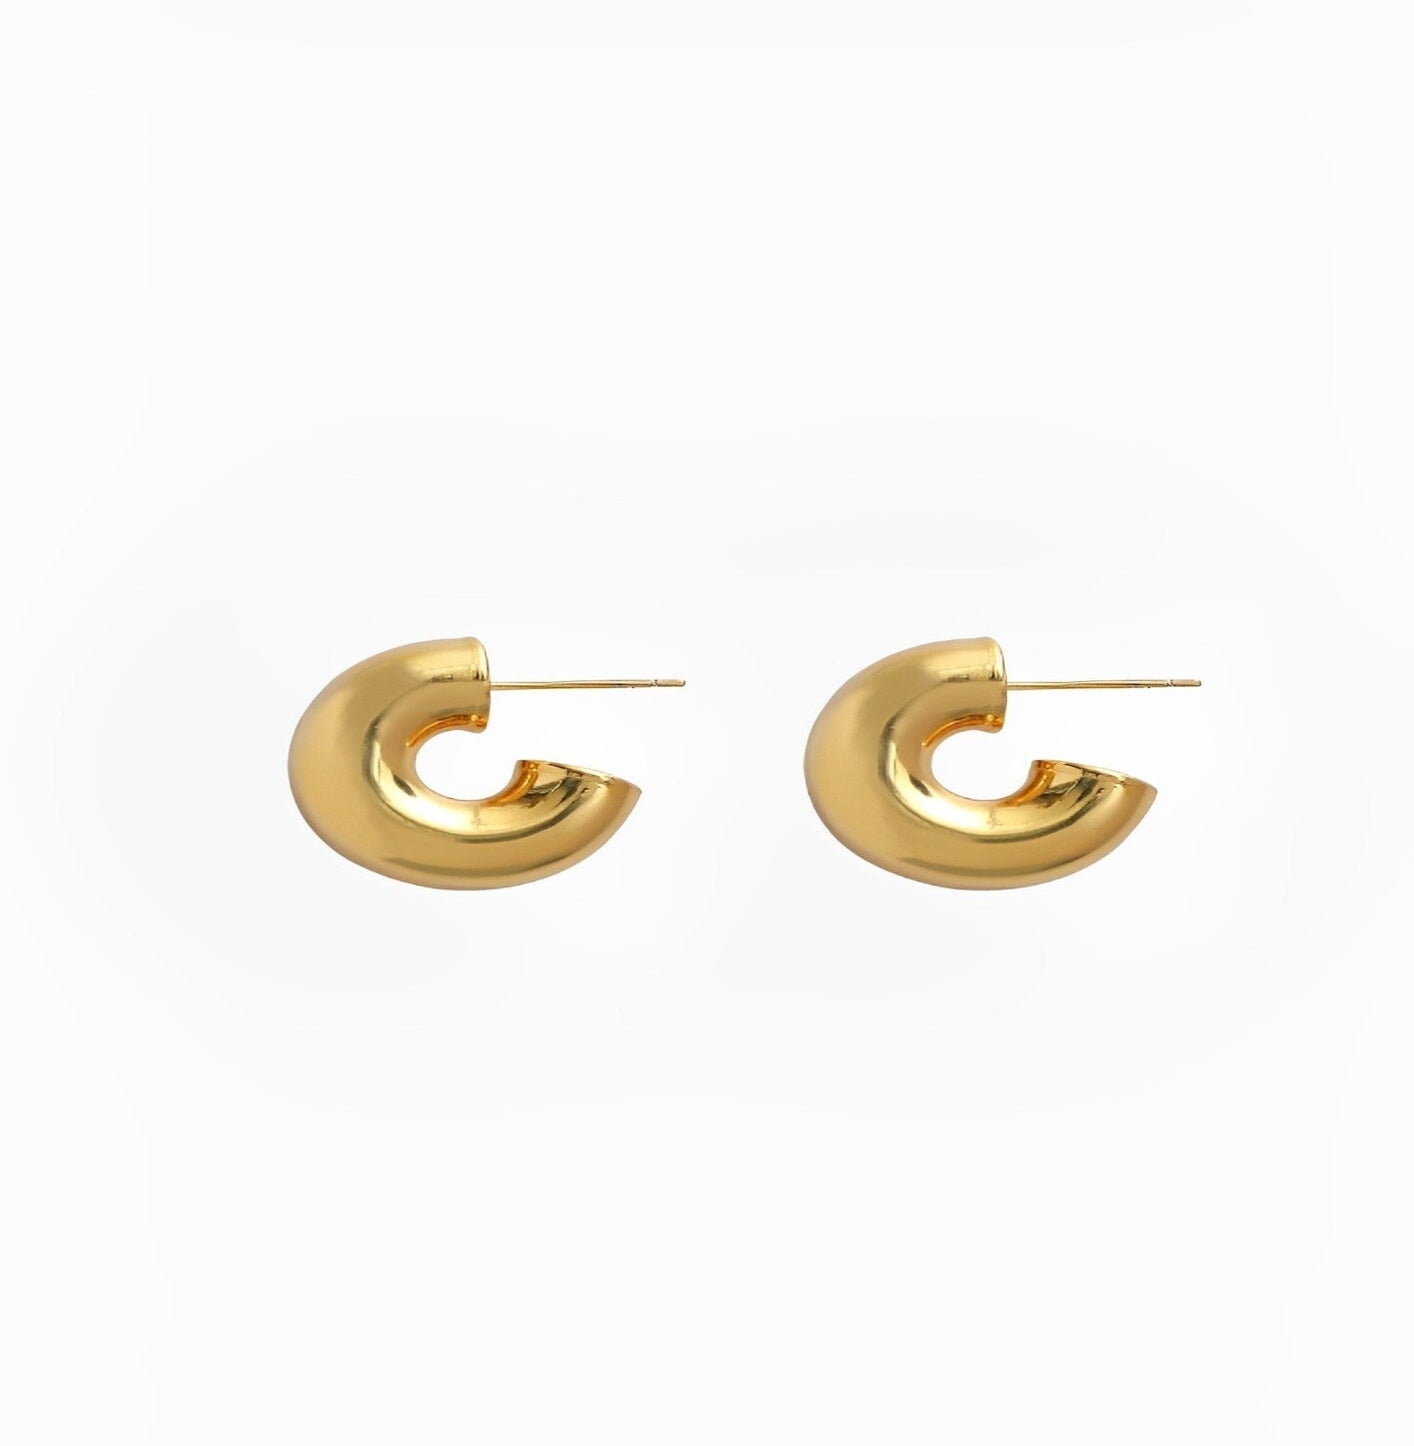 ARGO EARRINGS earing Yubama Jewelry Online Store - The Elegant Designs of Gold and Silver ! 